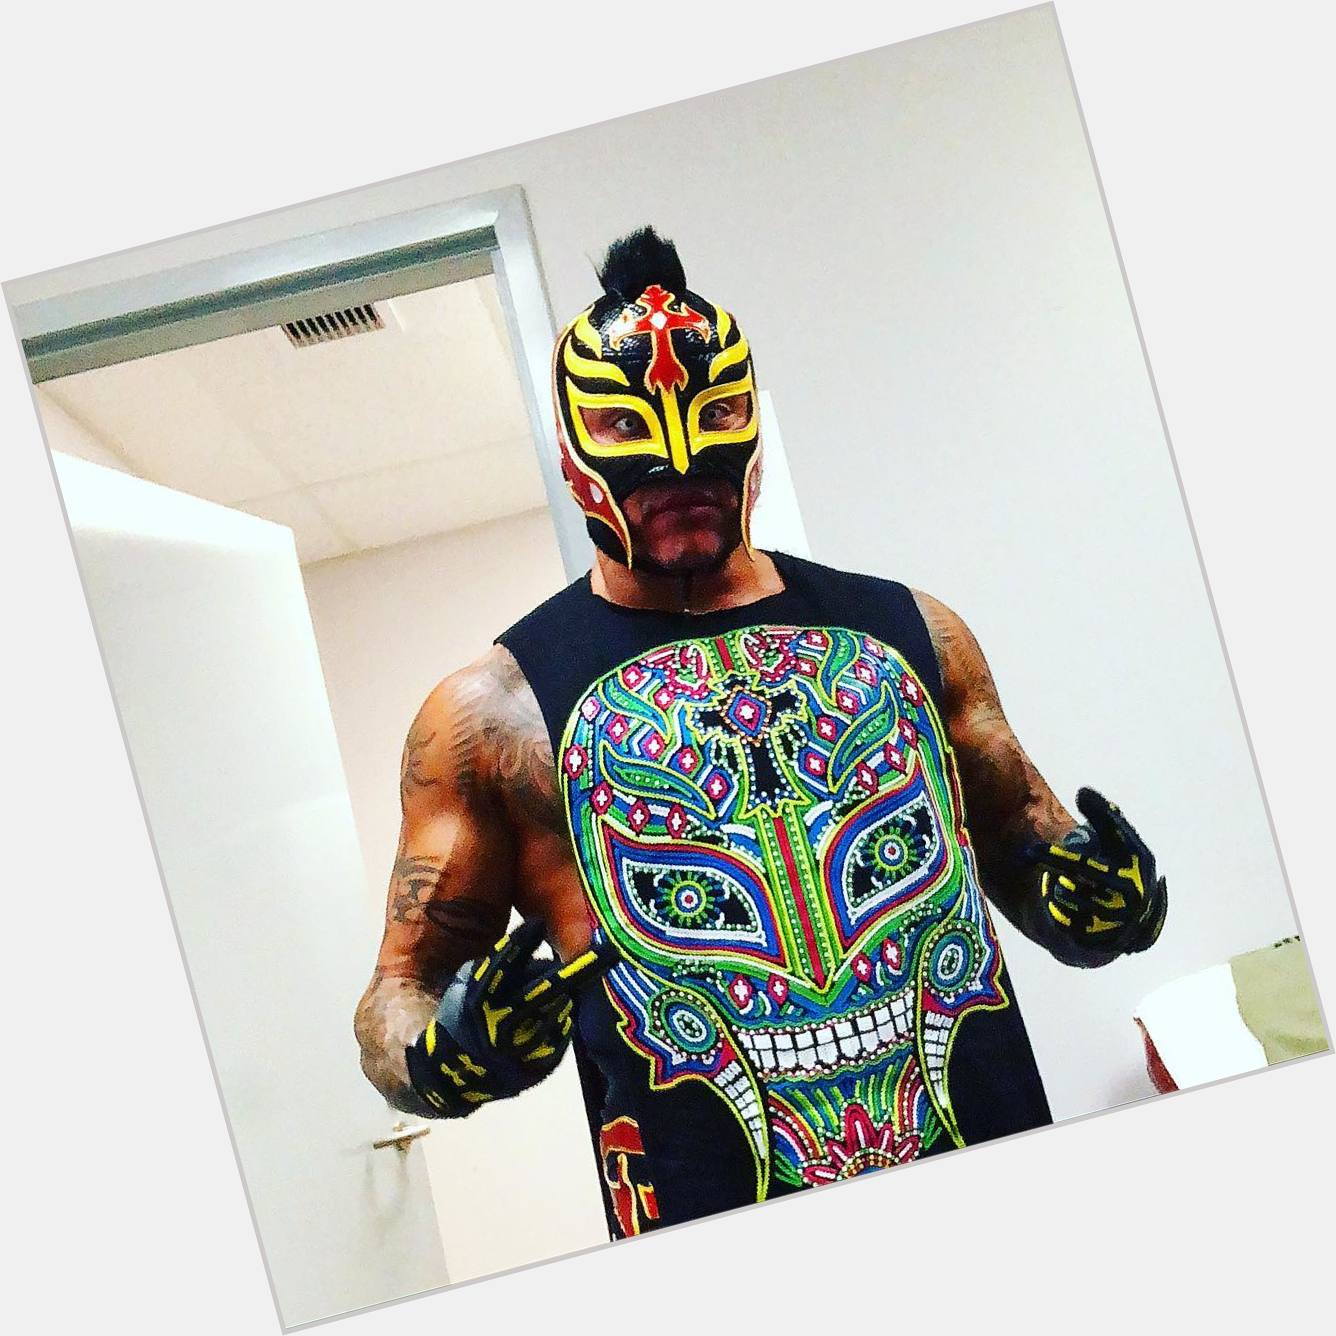 Happy Birthday to SmackDown Live star Rey Mysterio who turns 44 today! 